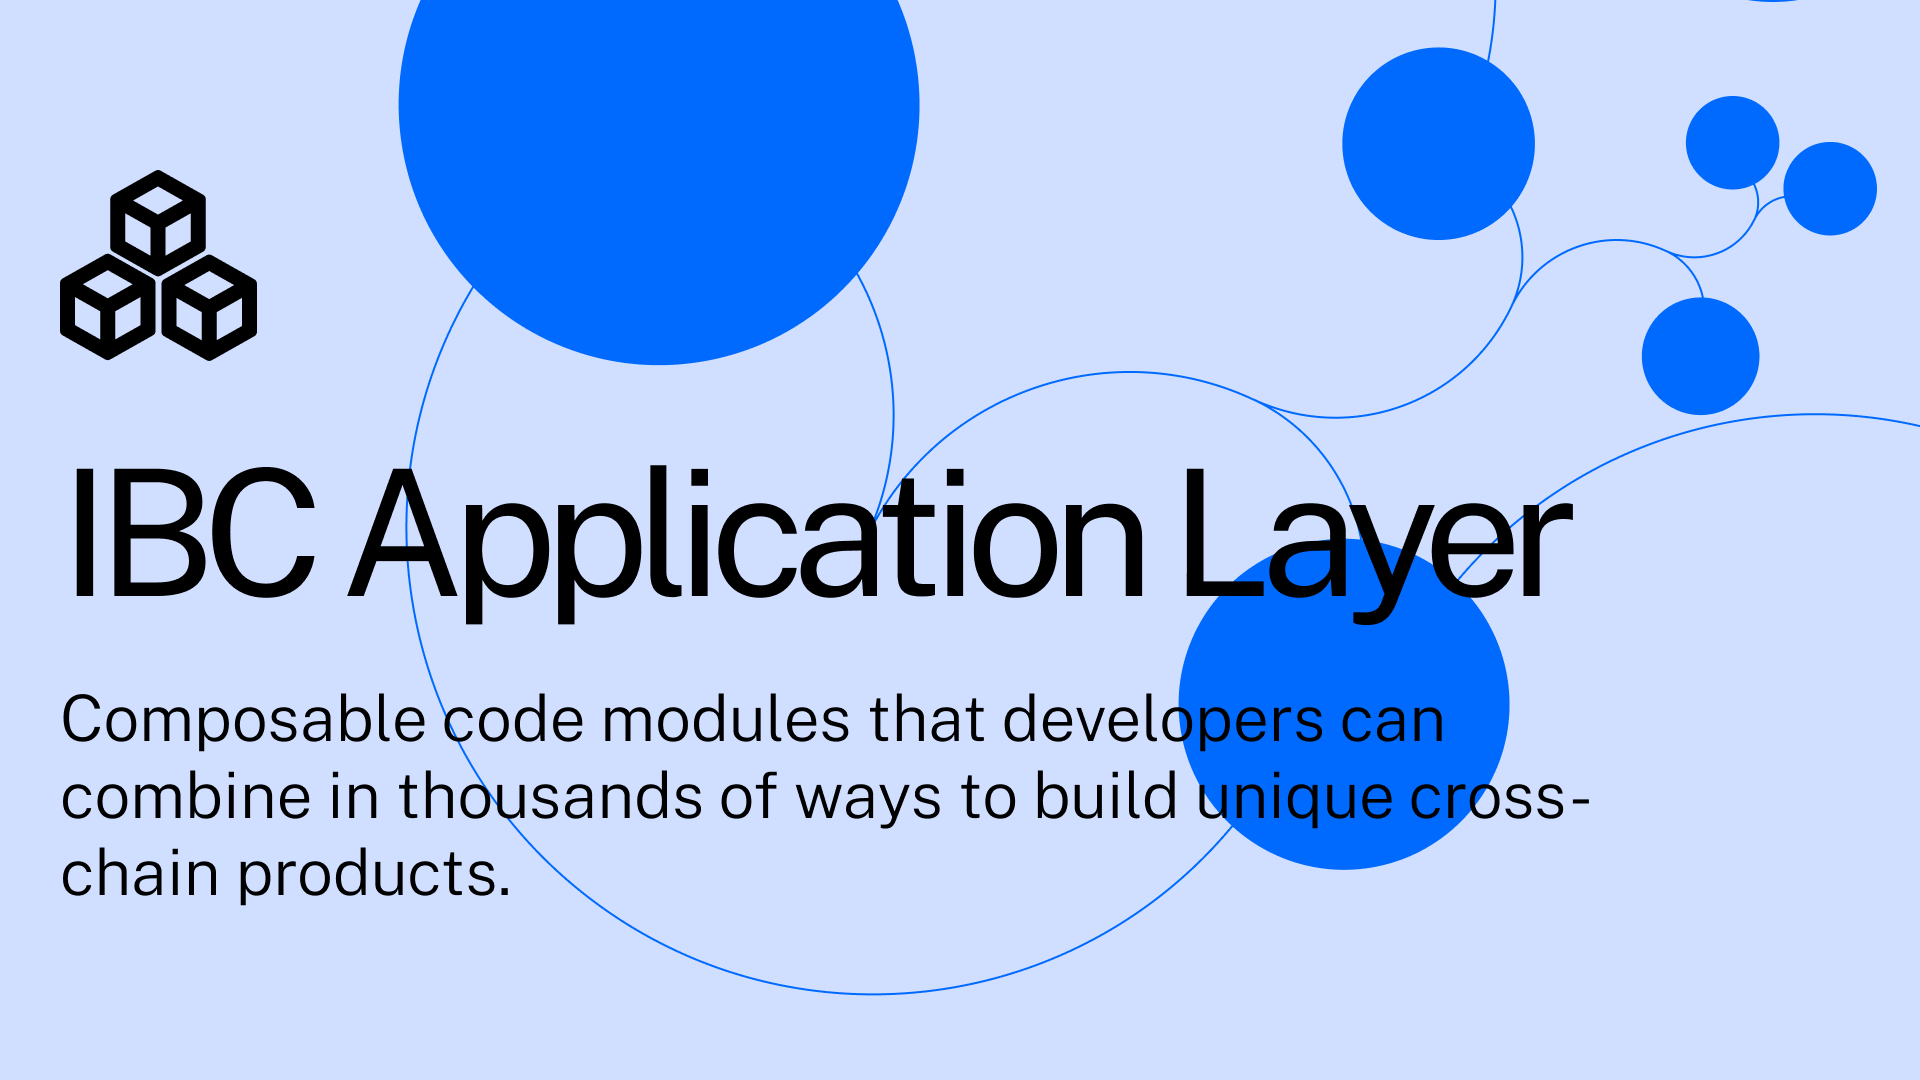 The IBC application layer is made up of composable code modules.